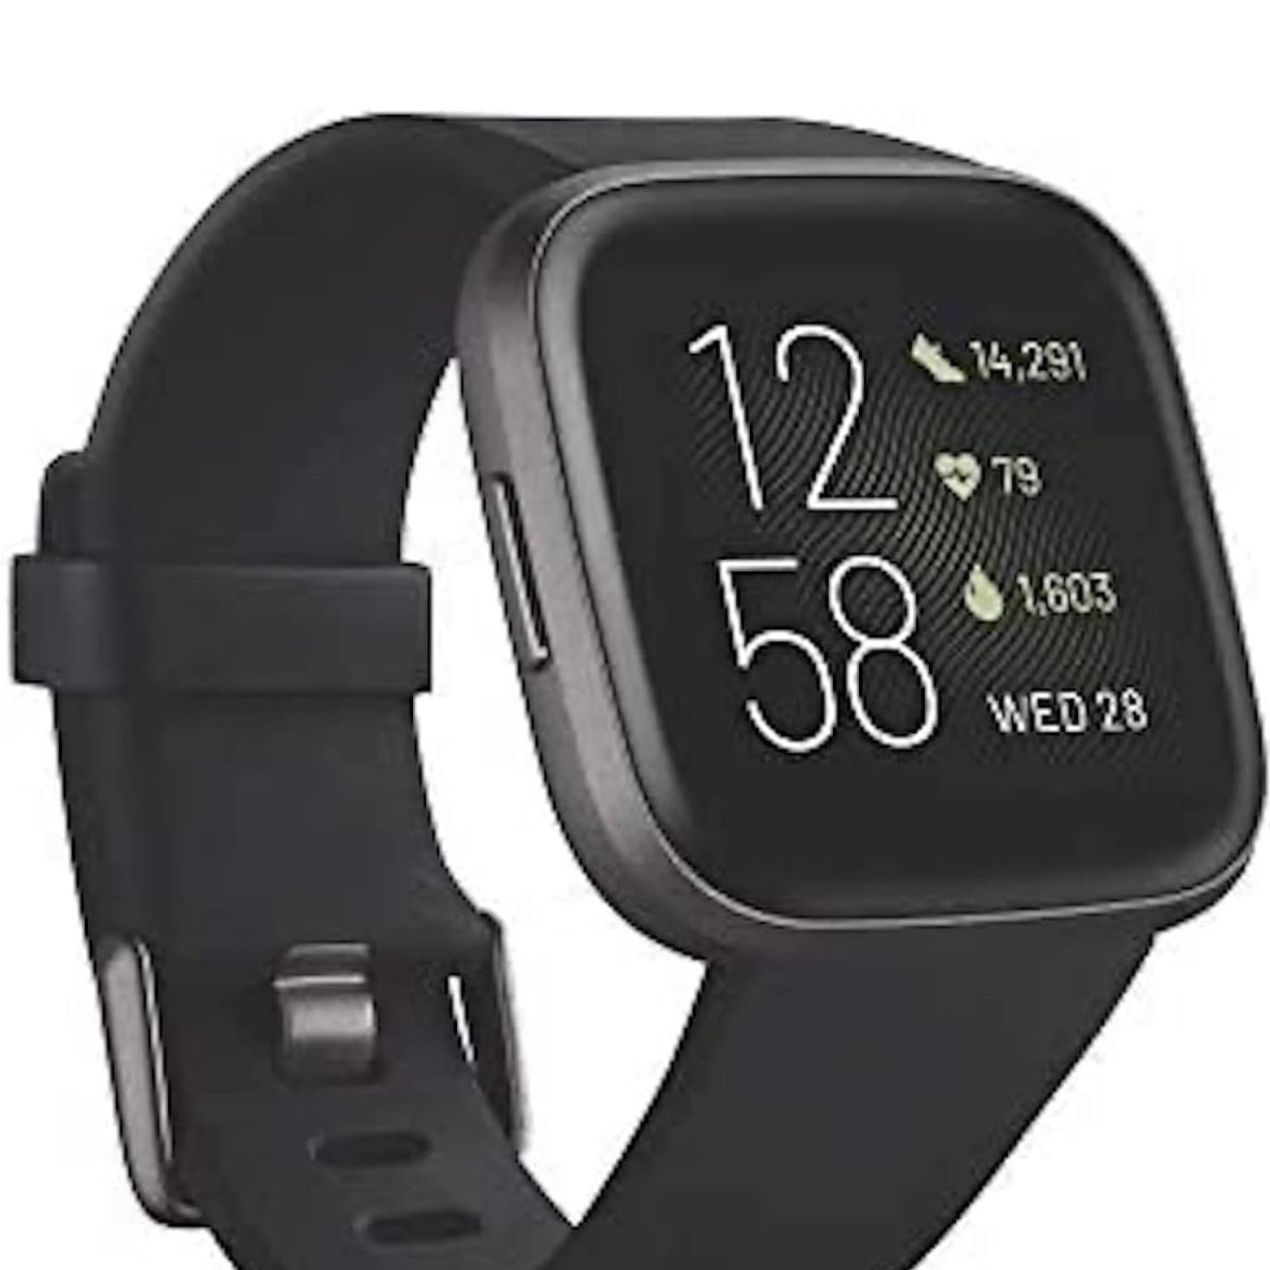 Fitbit Versa 2 Perfect Condition 